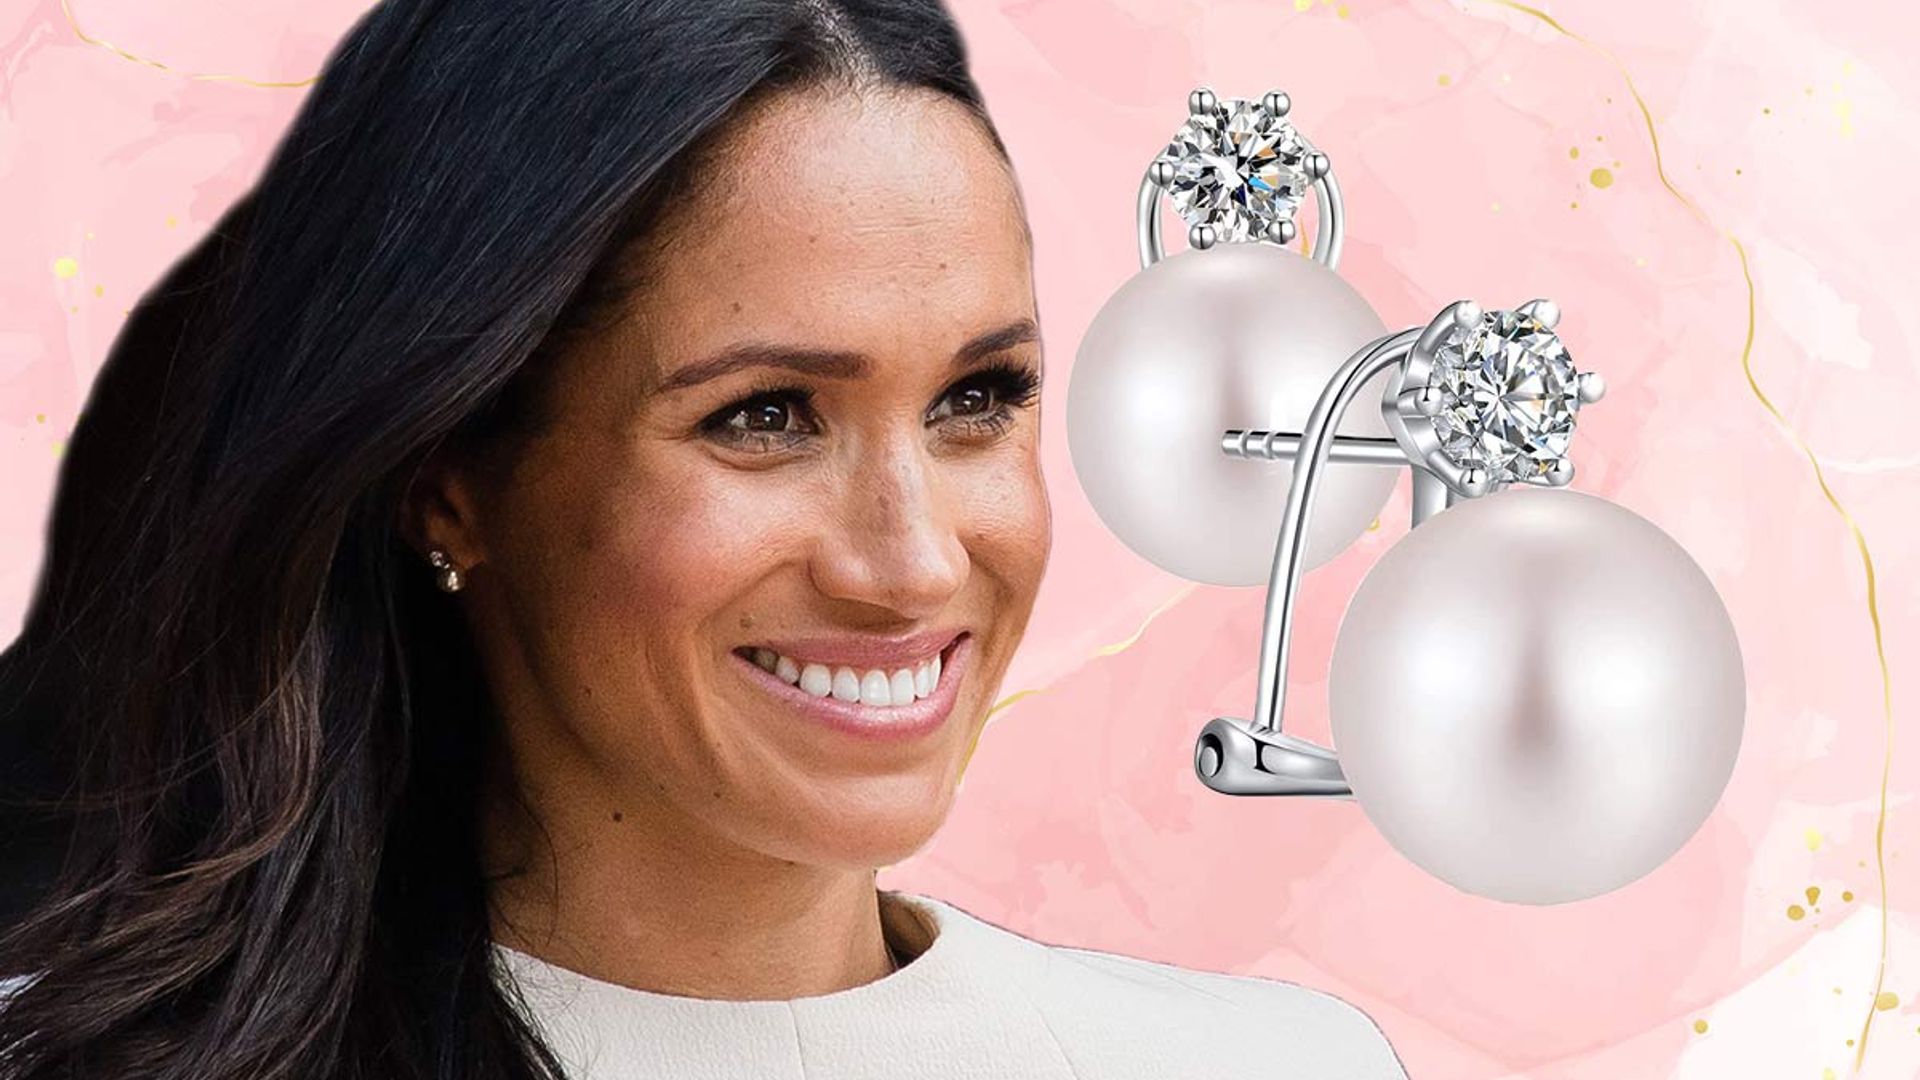 Amazon has a perfect lookalike of Meghan Markle's pearl earrings from the Queen